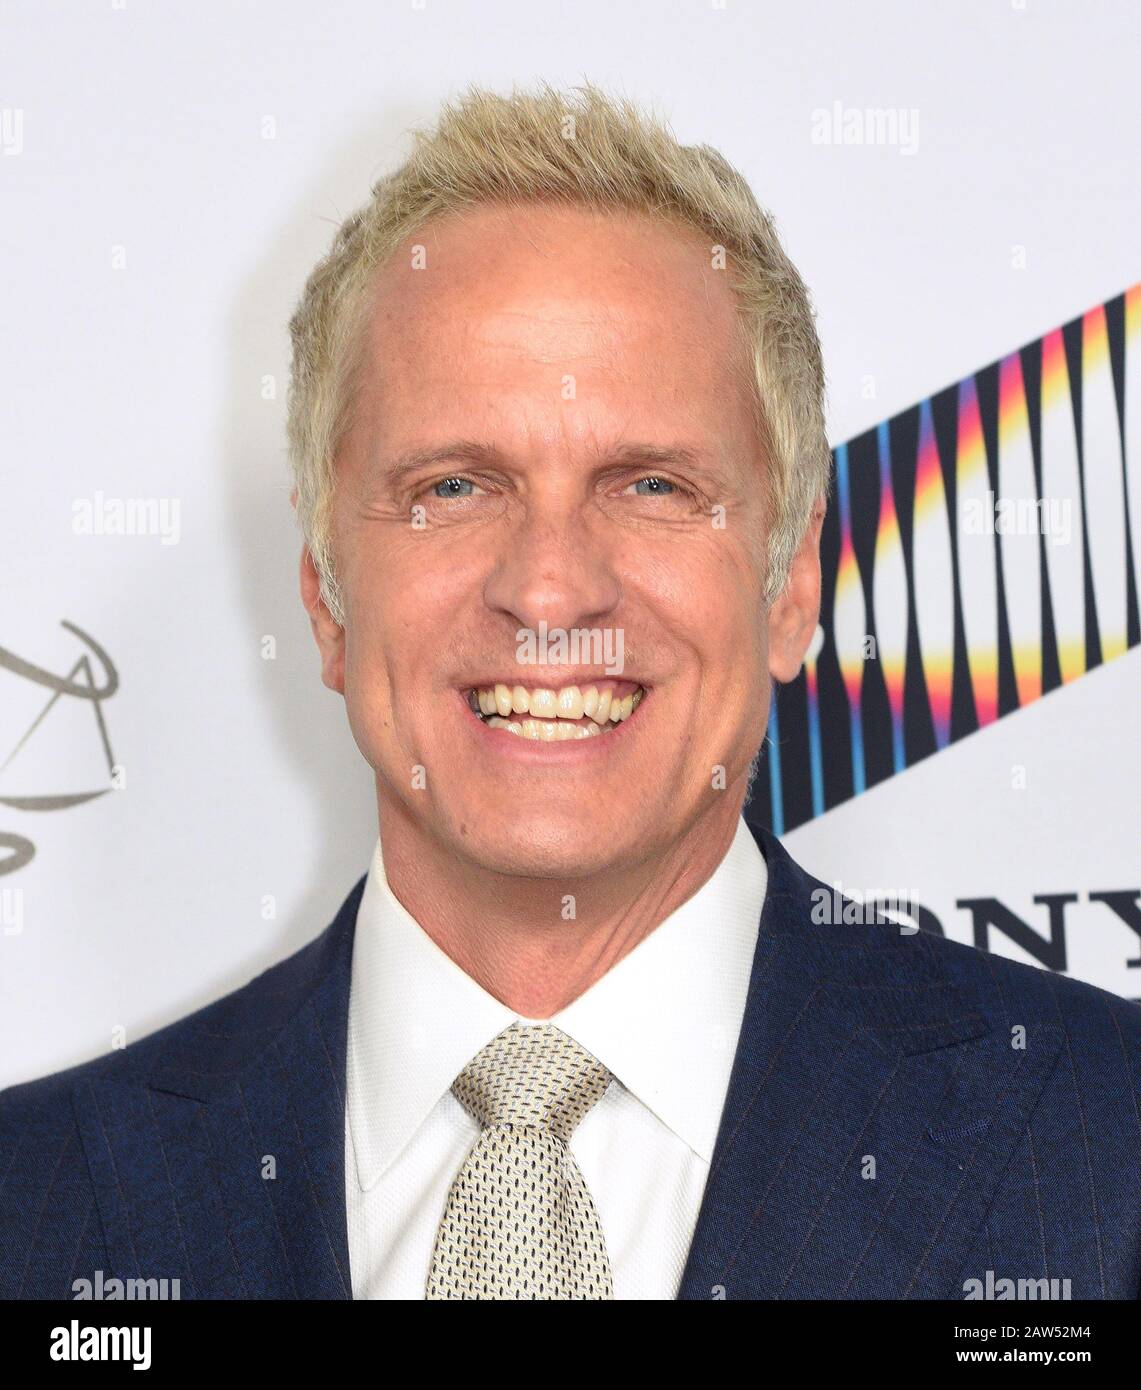 HOLLYWOOD, CALIFORNIA - FEBRUARY 05: Patrick Fabian attends the premiere of AMC's 'Better Call Saul' Season 5 at ArcLight Cinemas on February 05, 2020 in Hollywood, California. Photo: Annie Lesser/imageSPACE/MediaPunch Stock Photo